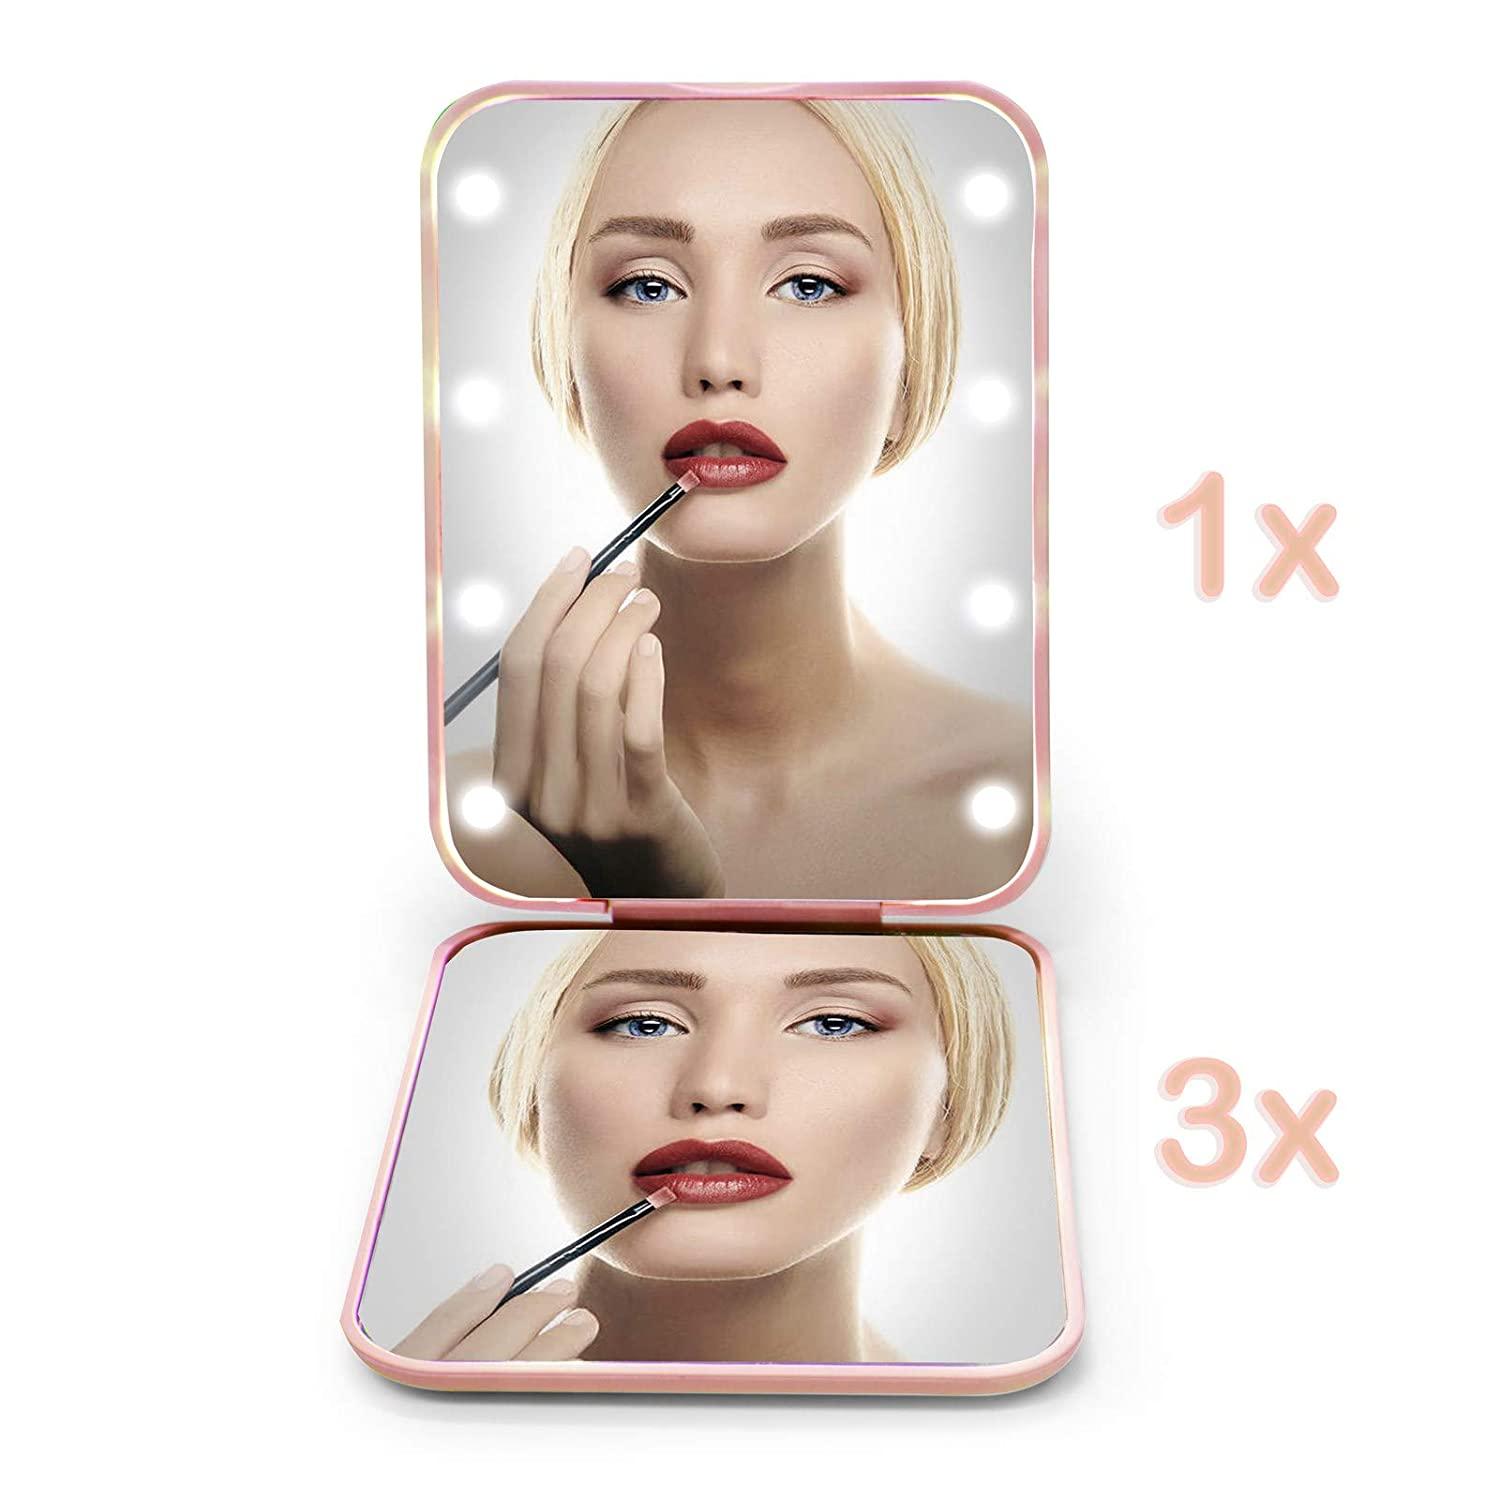 Kintion Pocket Mirror, 1X/3X Magnification LED Compact Travel Makeup Mirror,  Compact Mirror with Light, Purse